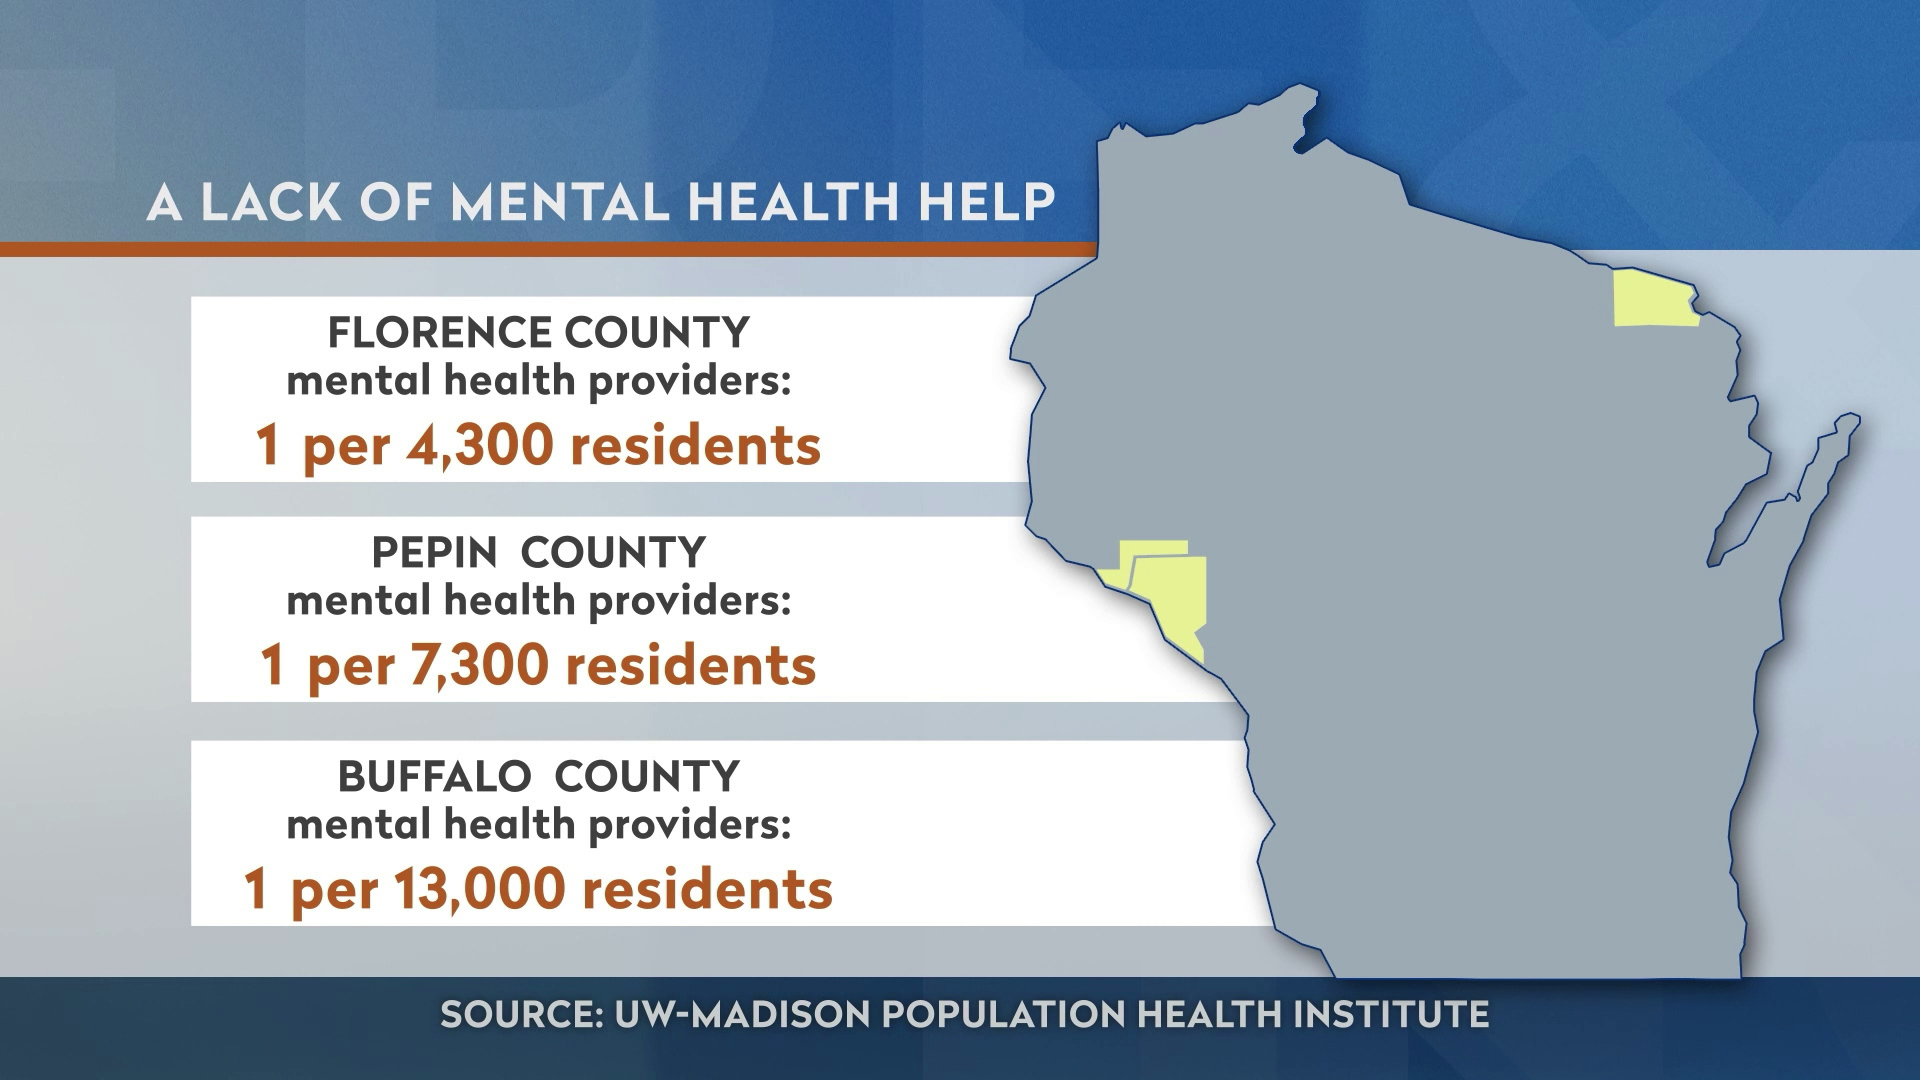 A map titled "A Lack of Mental Health Help" shows the number of mental health providers per capita in Florence, Pepin and Buffalo counties.